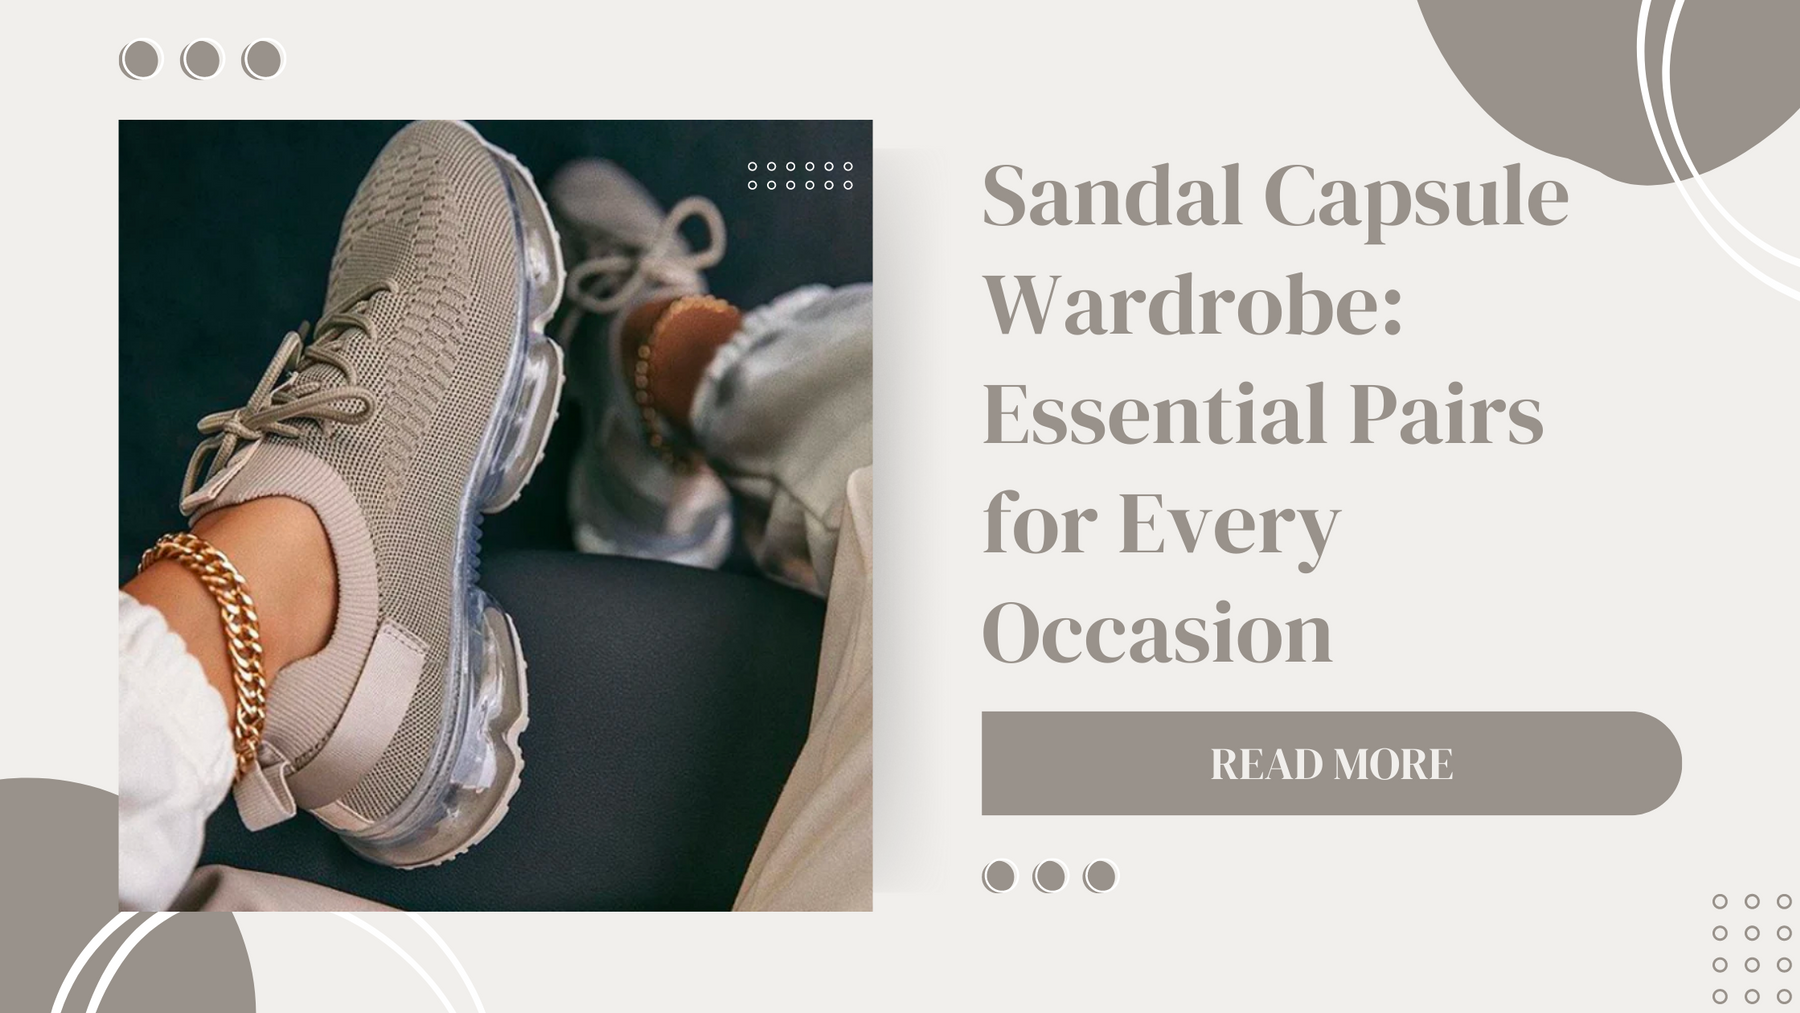 Sandal Capsule Wardrobe: Essential Pairs for Every Occasion